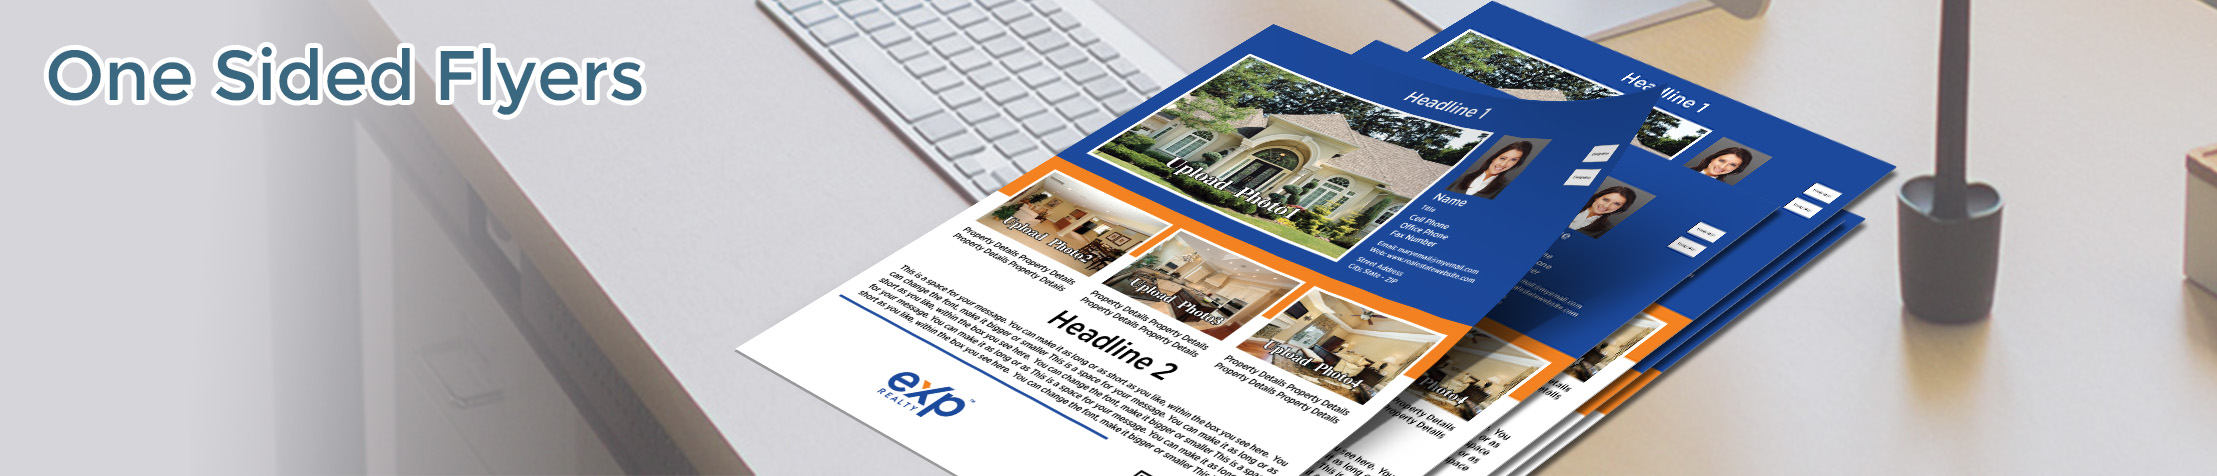  Real Estate Flyers and Brochures -  one-sided flyer templates for open houses and marketing | BestPrintBuy.com